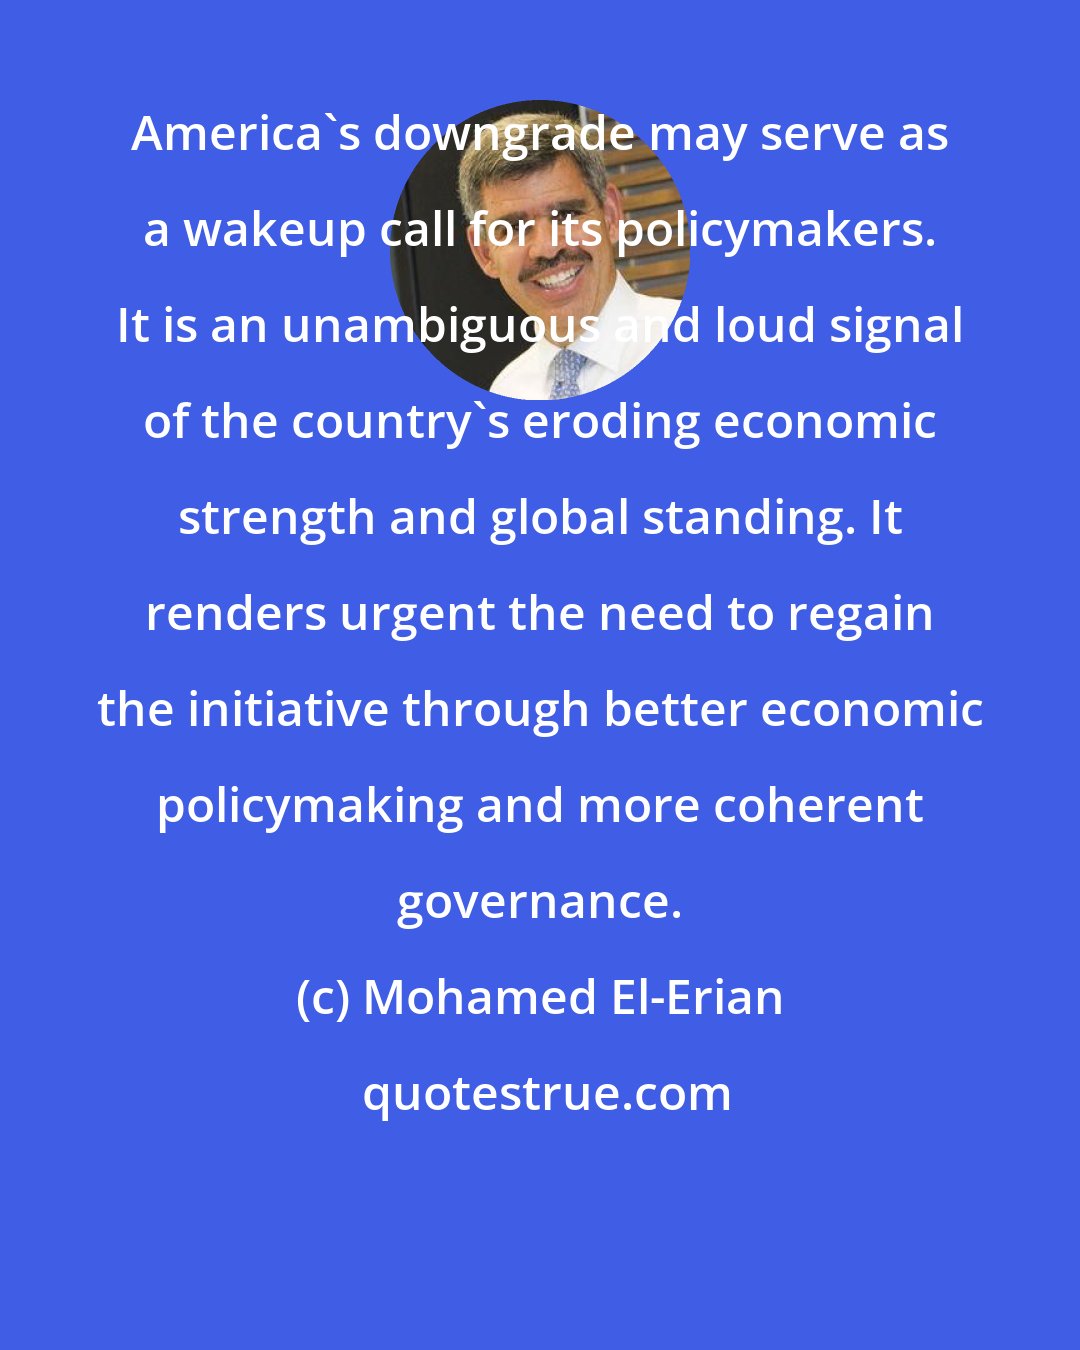 Mohamed El-Erian: America's downgrade may serve as a wakeup call for its policymakers. It is an unambiguous and loud signal of the country's eroding economic strength and global standing. It renders urgent the need to regain the initiative through better economic policymaking and more coherent governance.